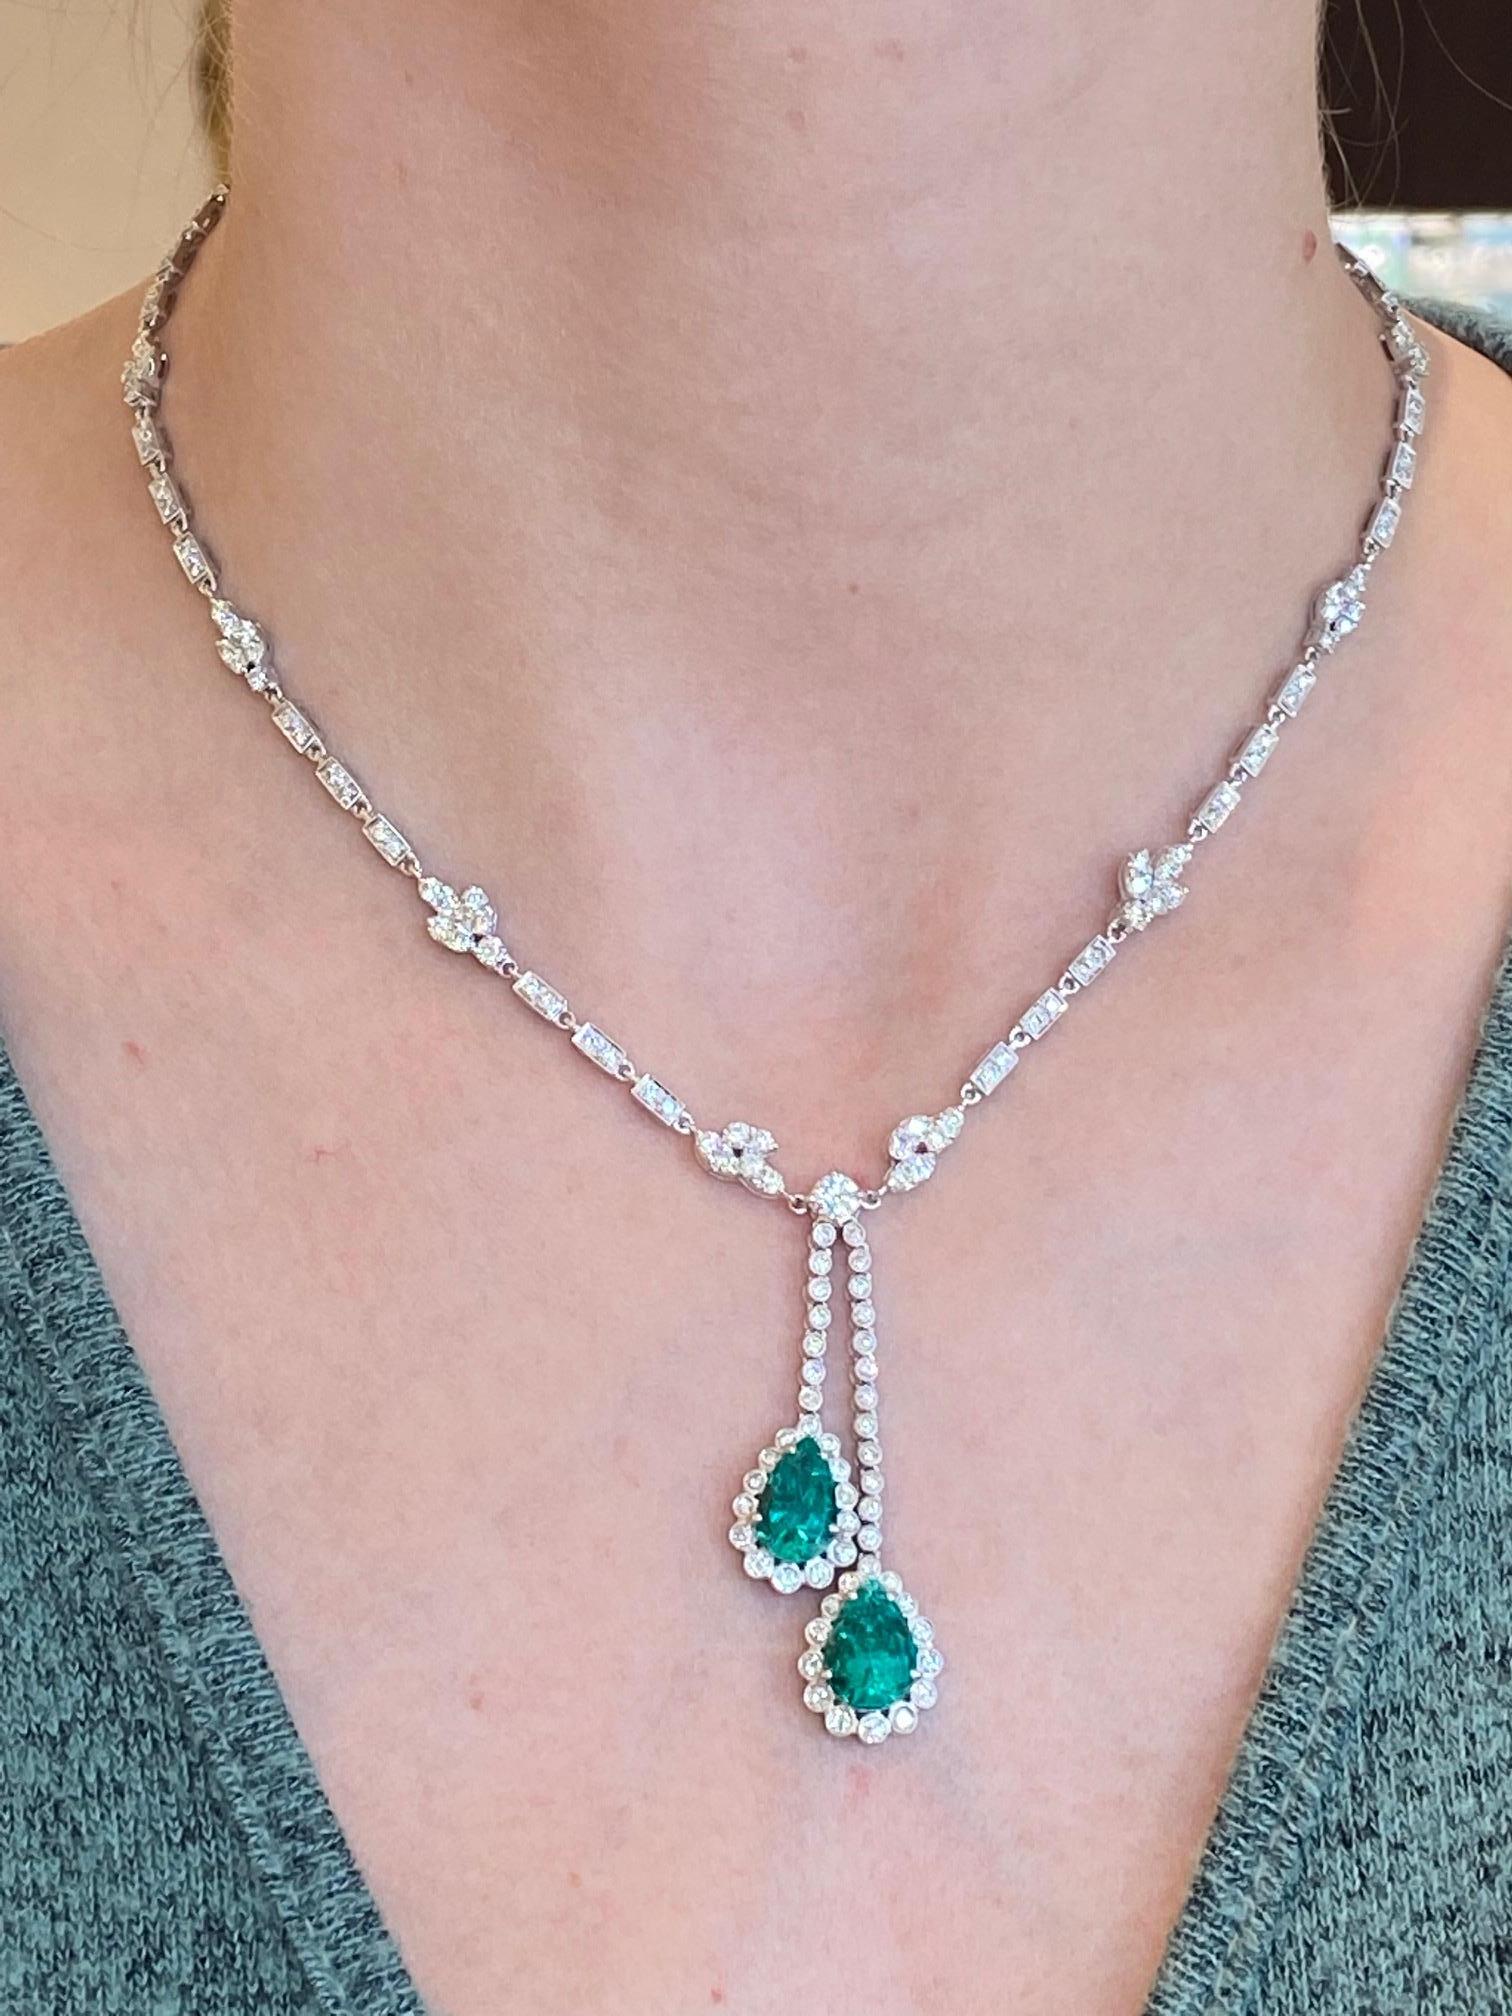 Pear Cut 4.76 Carat Pear Shaped Emerald and Diamond Drop Necklace in 18KT White Gold For Sale